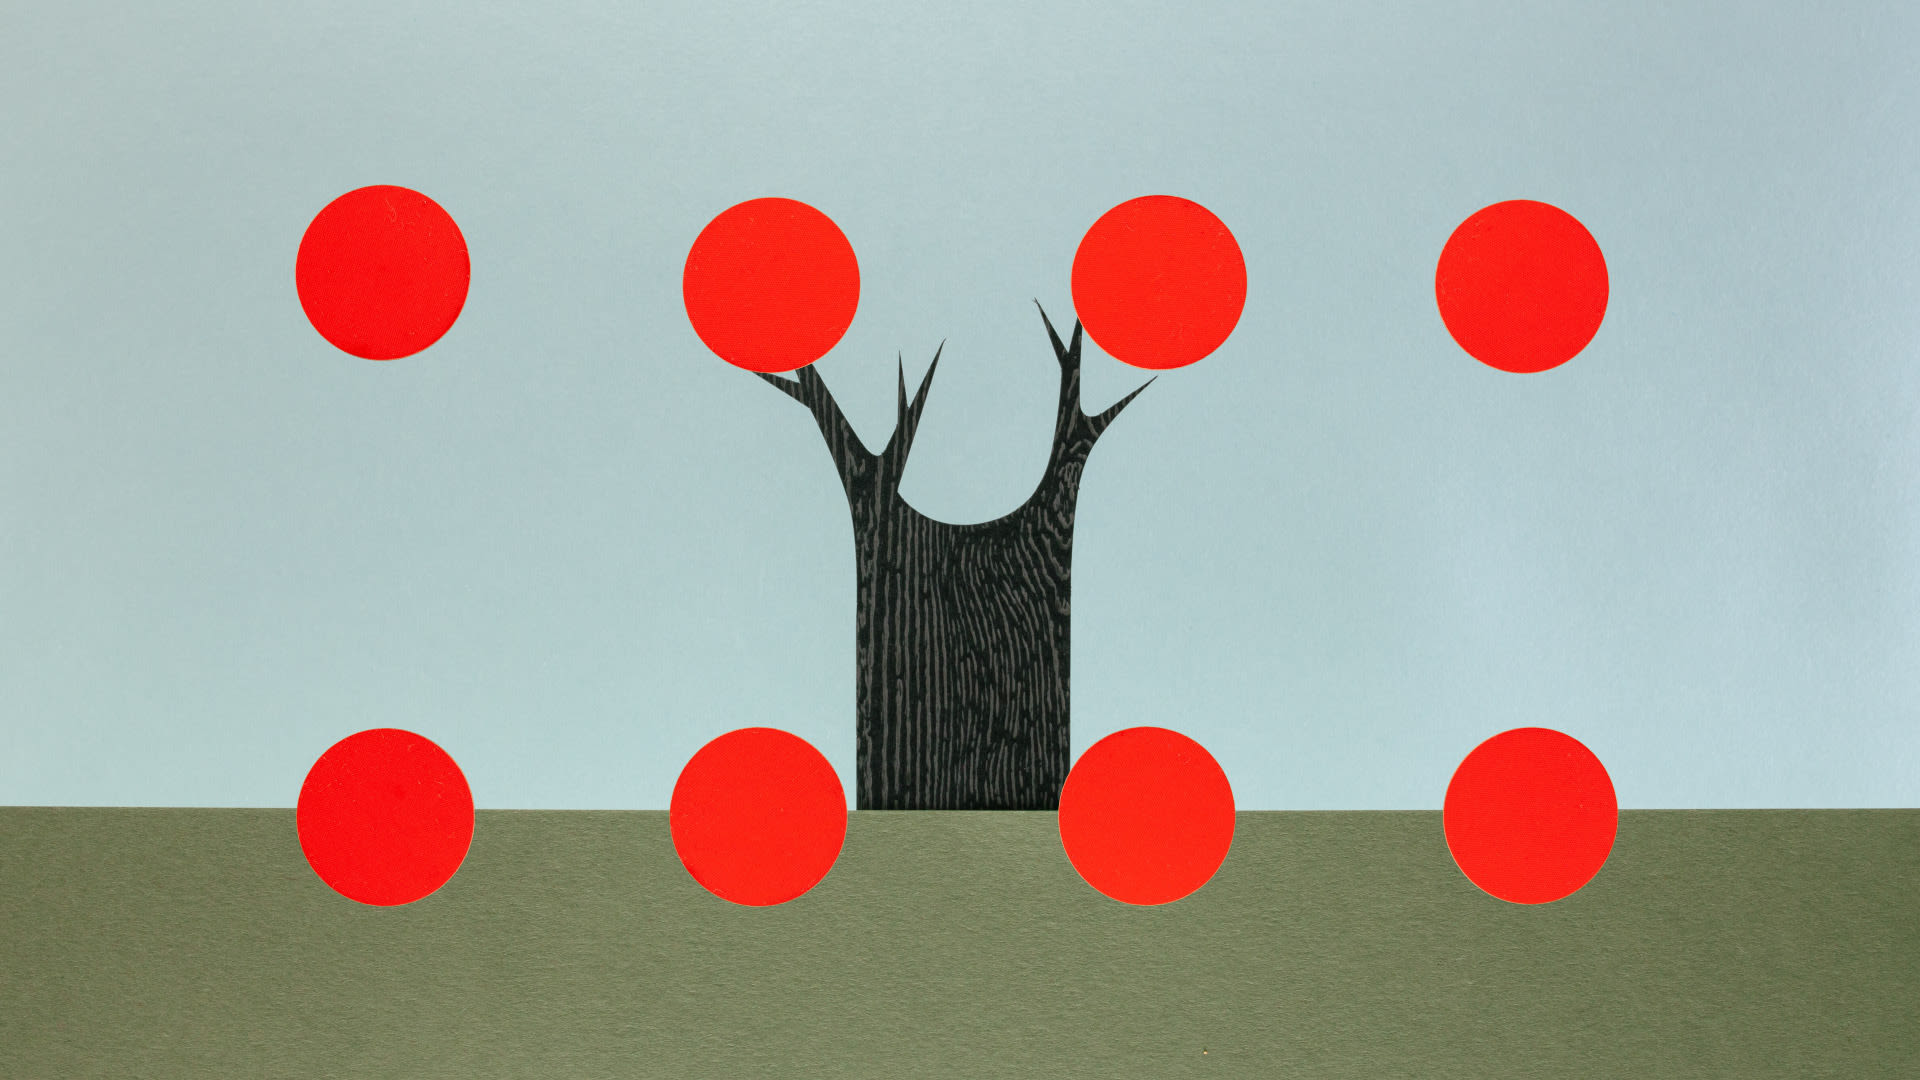 Paper scene with tree, grass, sky. 8 red dots arranged in grid overlayed. 